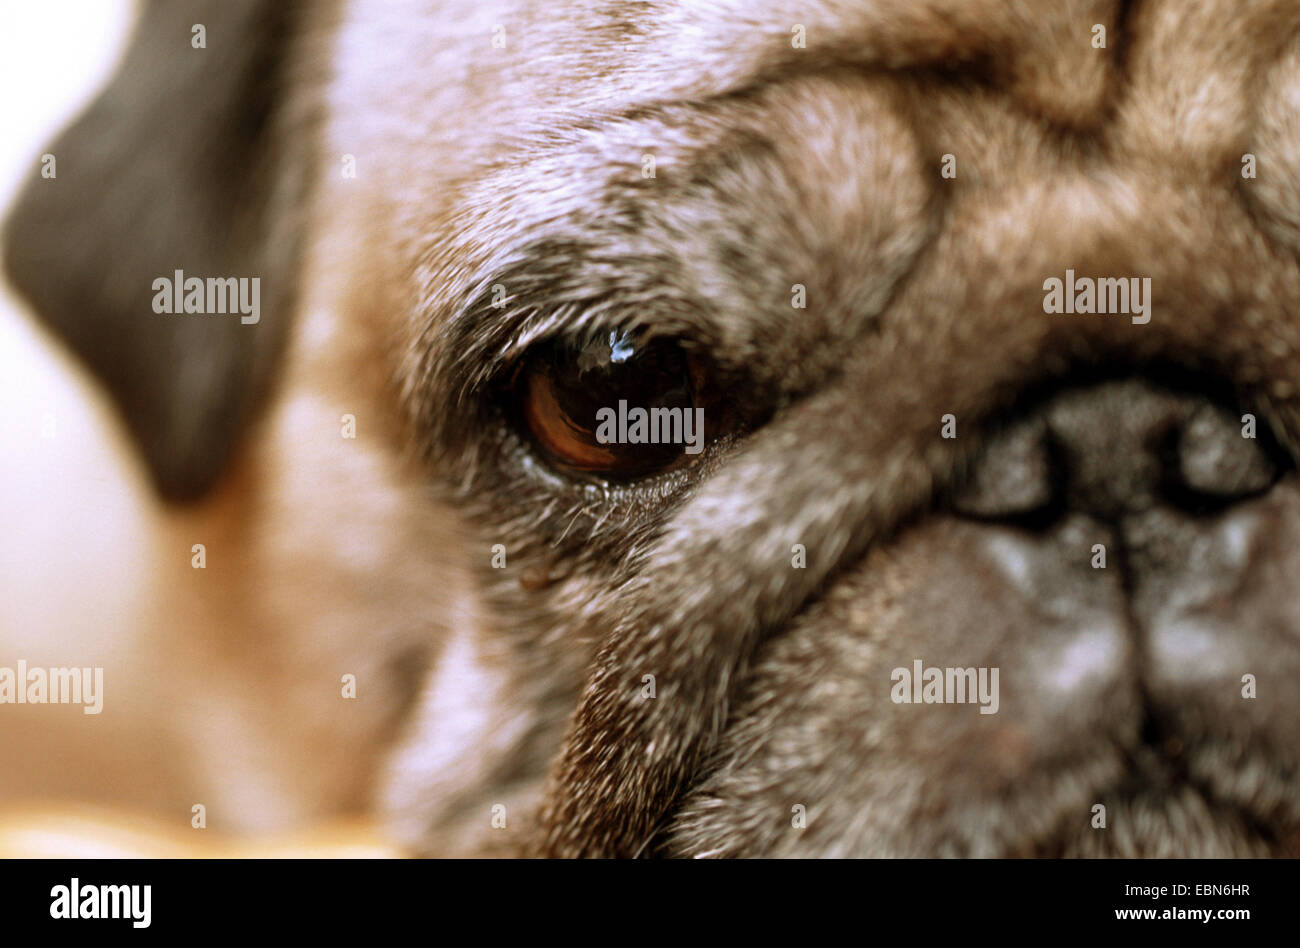 Pug (Canis lupus f. familiaris), looking at the camera, closeup of an eye Stock Photo